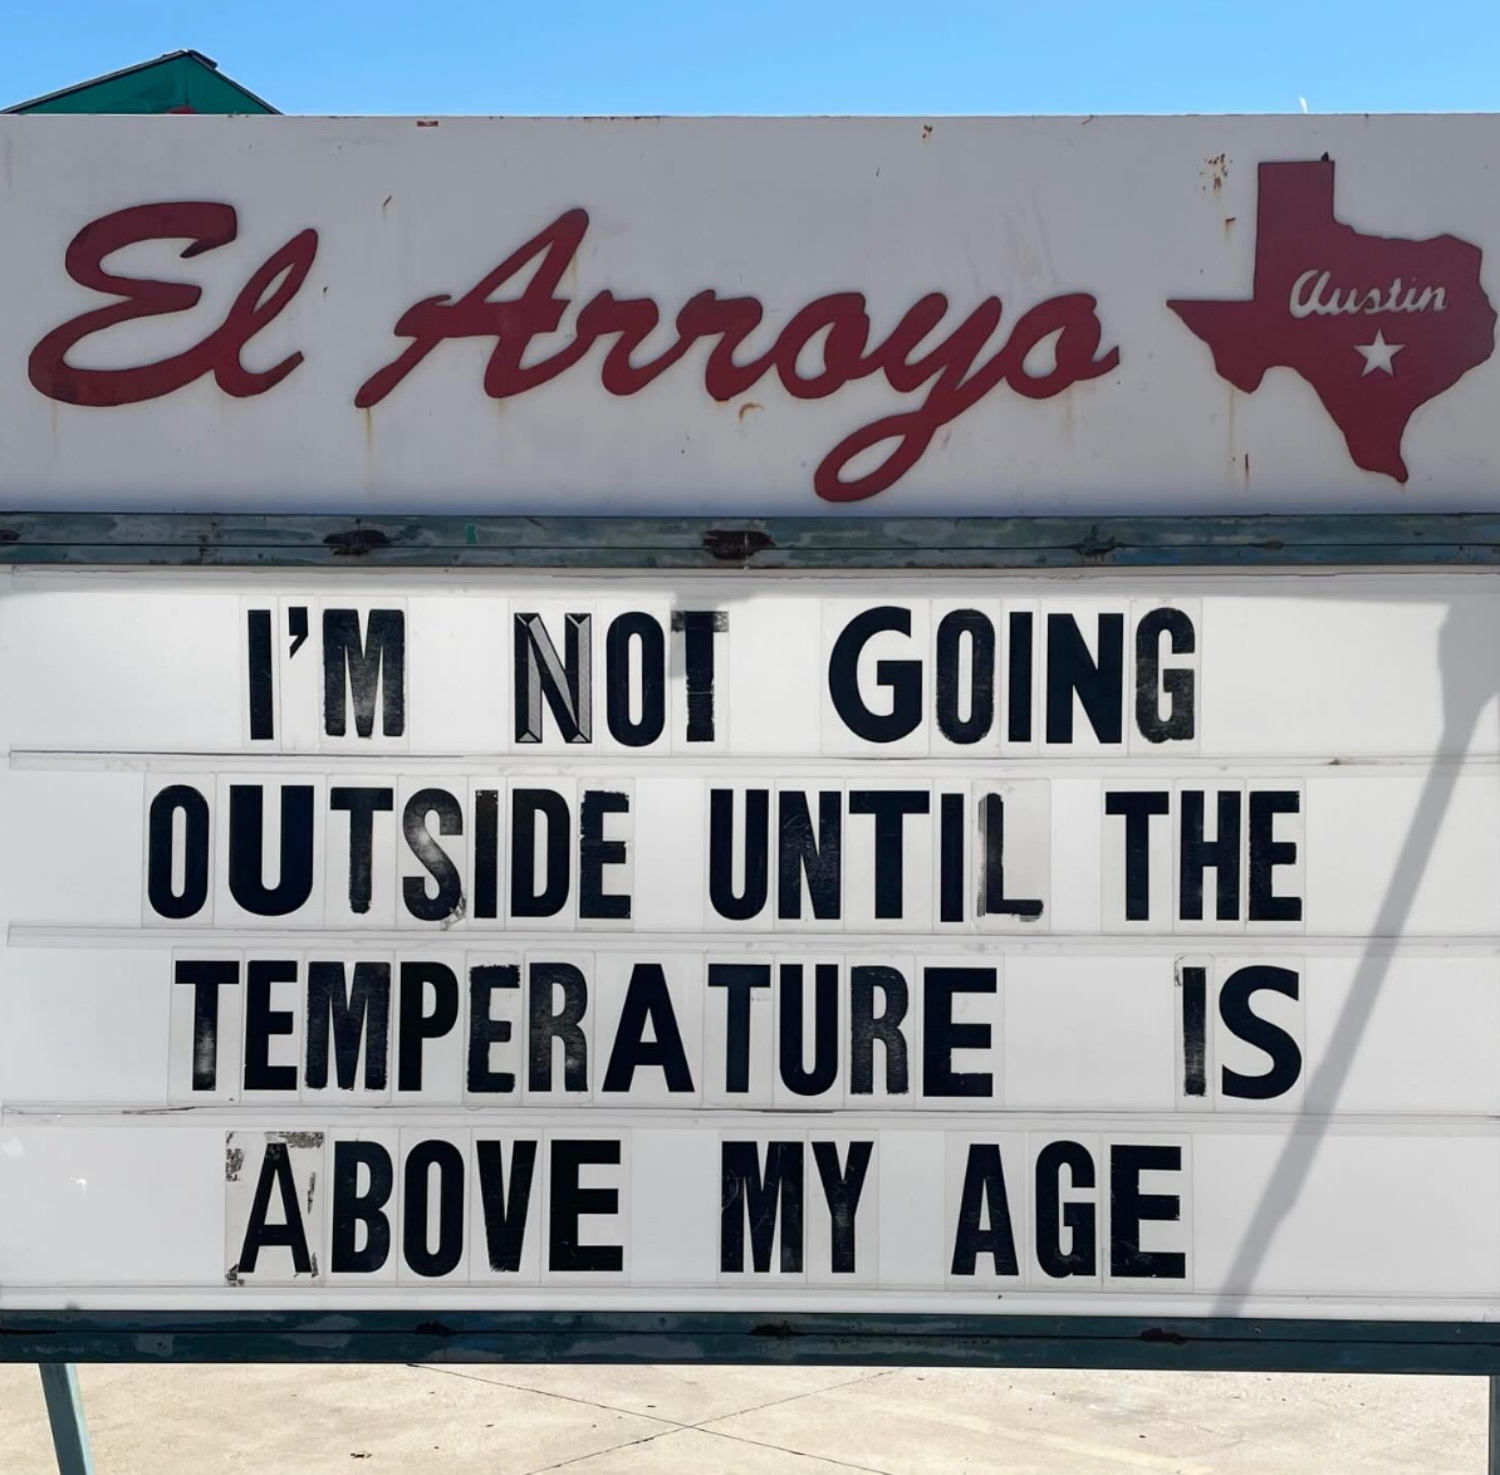 funny joke about temperature and age